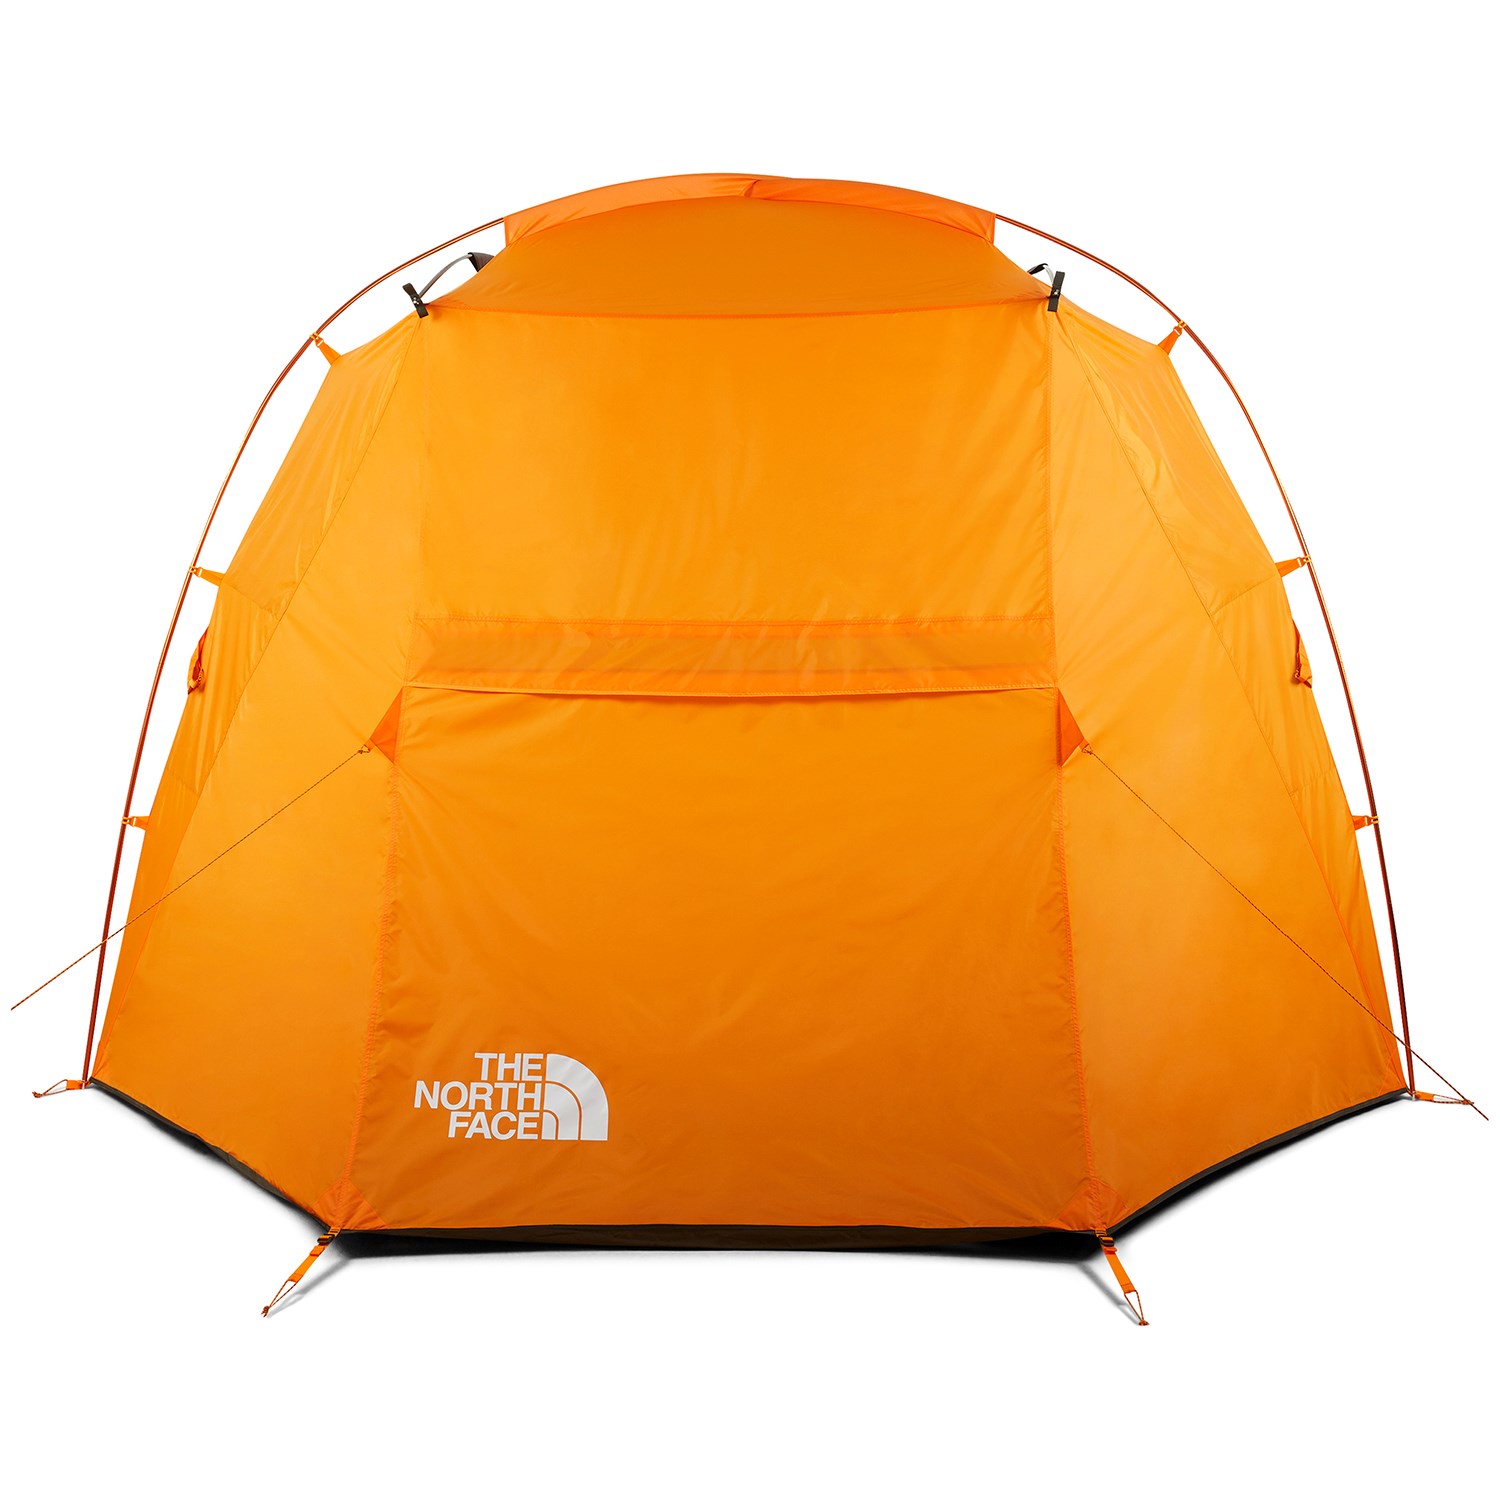 The North Face Homestead Shelter Deals, SAVE 52%.